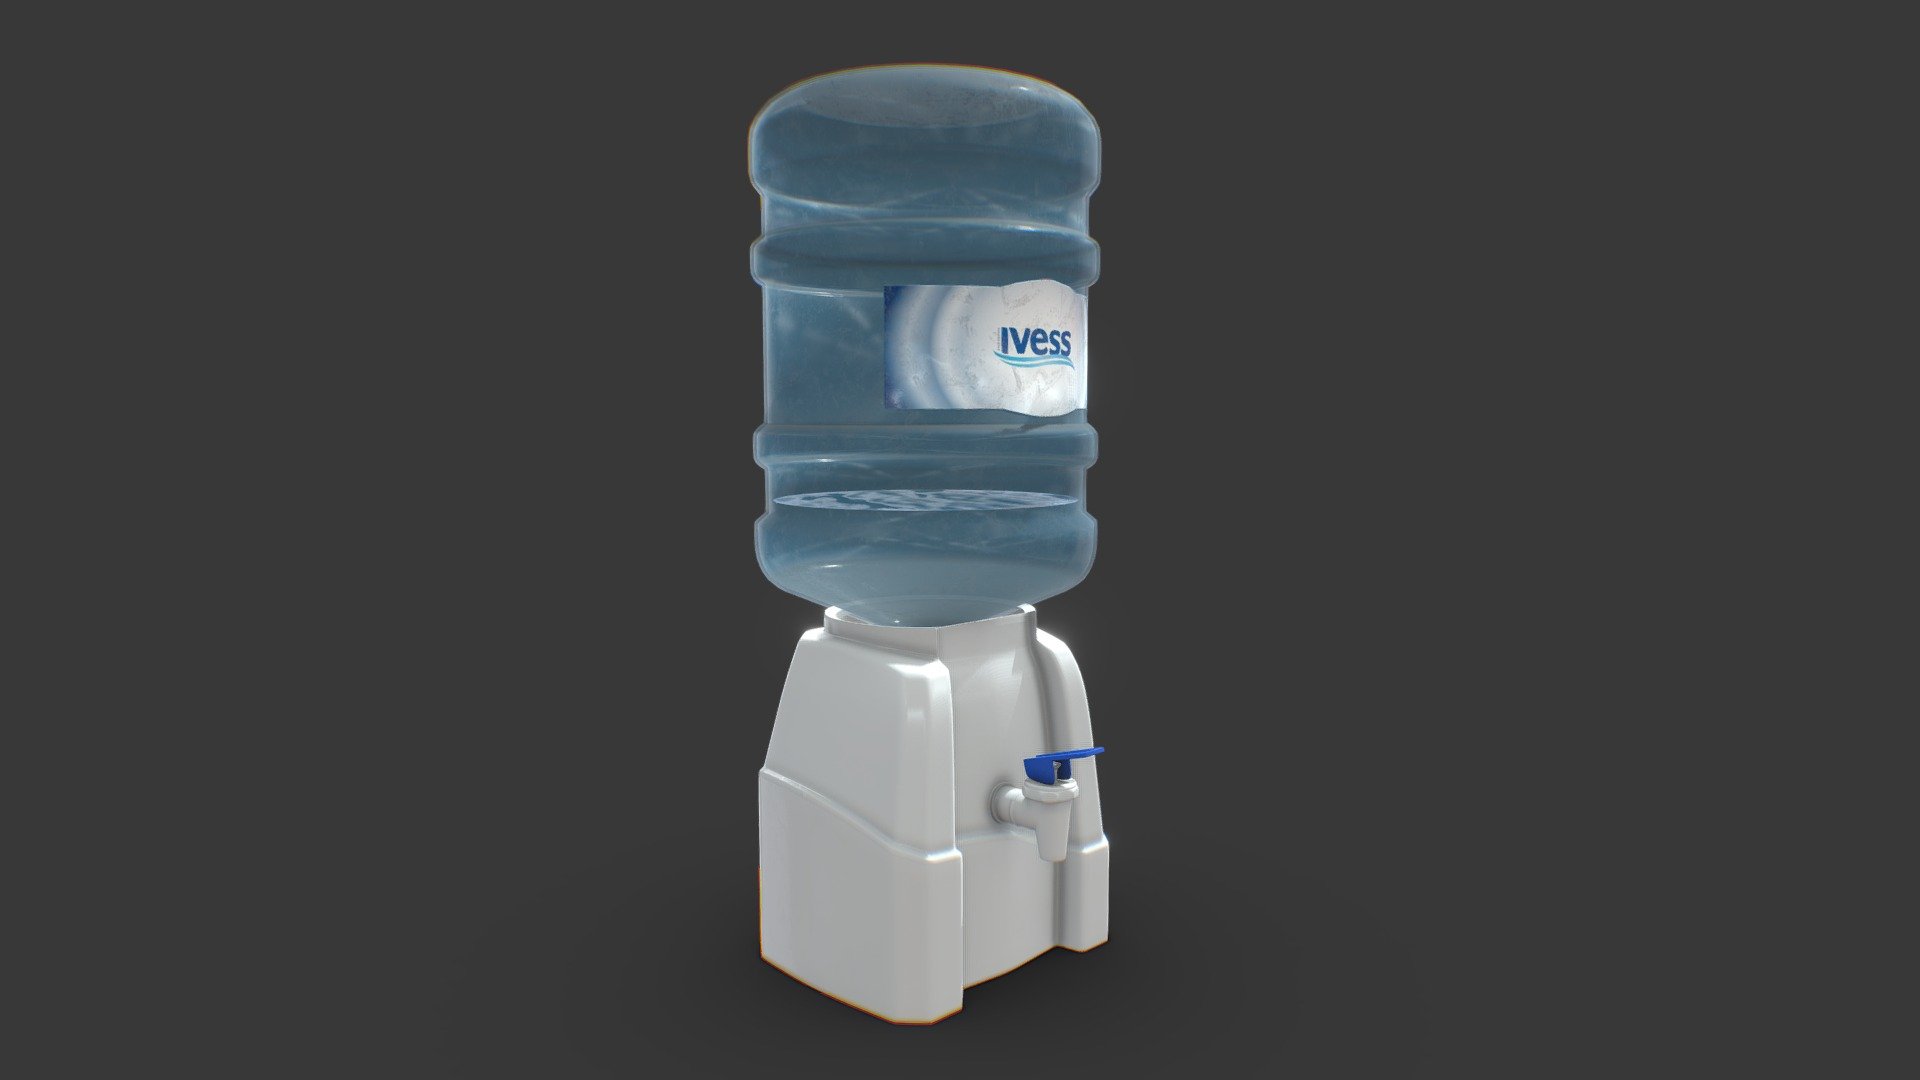 Give us a like if you download it, please.
Follow us on Instagram: https://www.instagram.com/agencia.alterego/

Simple water dispenser modeled in 3DS Max and textured in Substance Painter. Completely free to download! - Water Dispenser - Download Free 3D model by Álterego (@alter_ego) 3d model